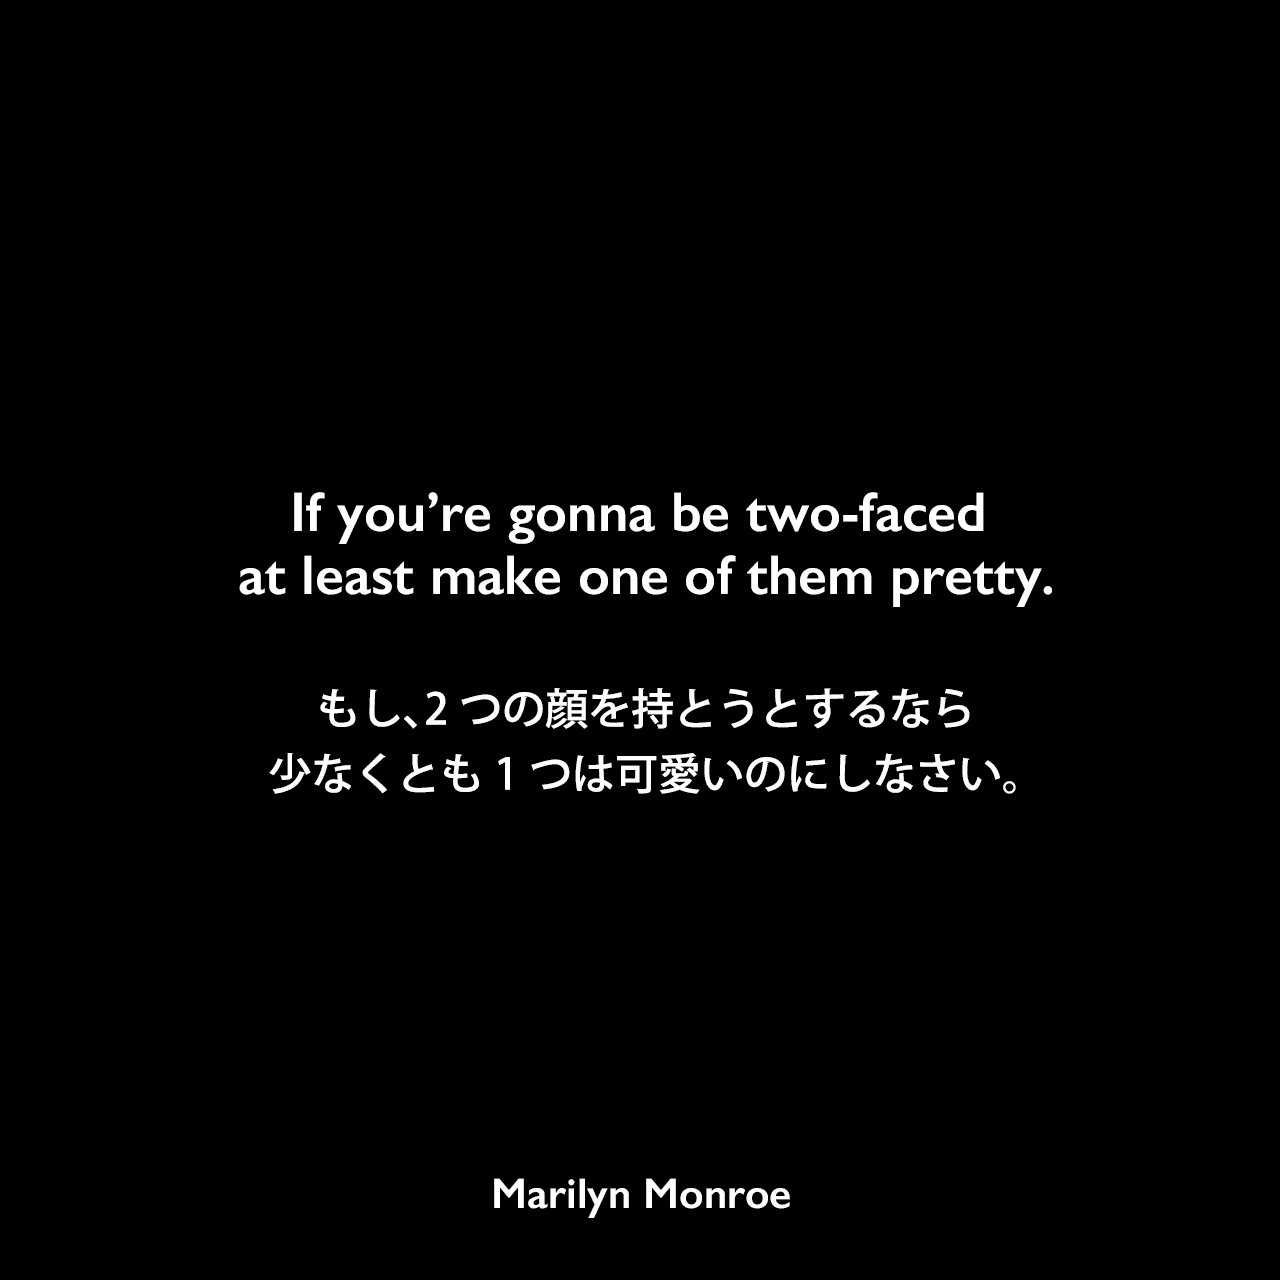 If you’re gonna be two-faced at least make one of them pretty.もし、2つの顔を持とうとするなら少なくとも1つは可愛いのにしなさい。Marilyn Monroe